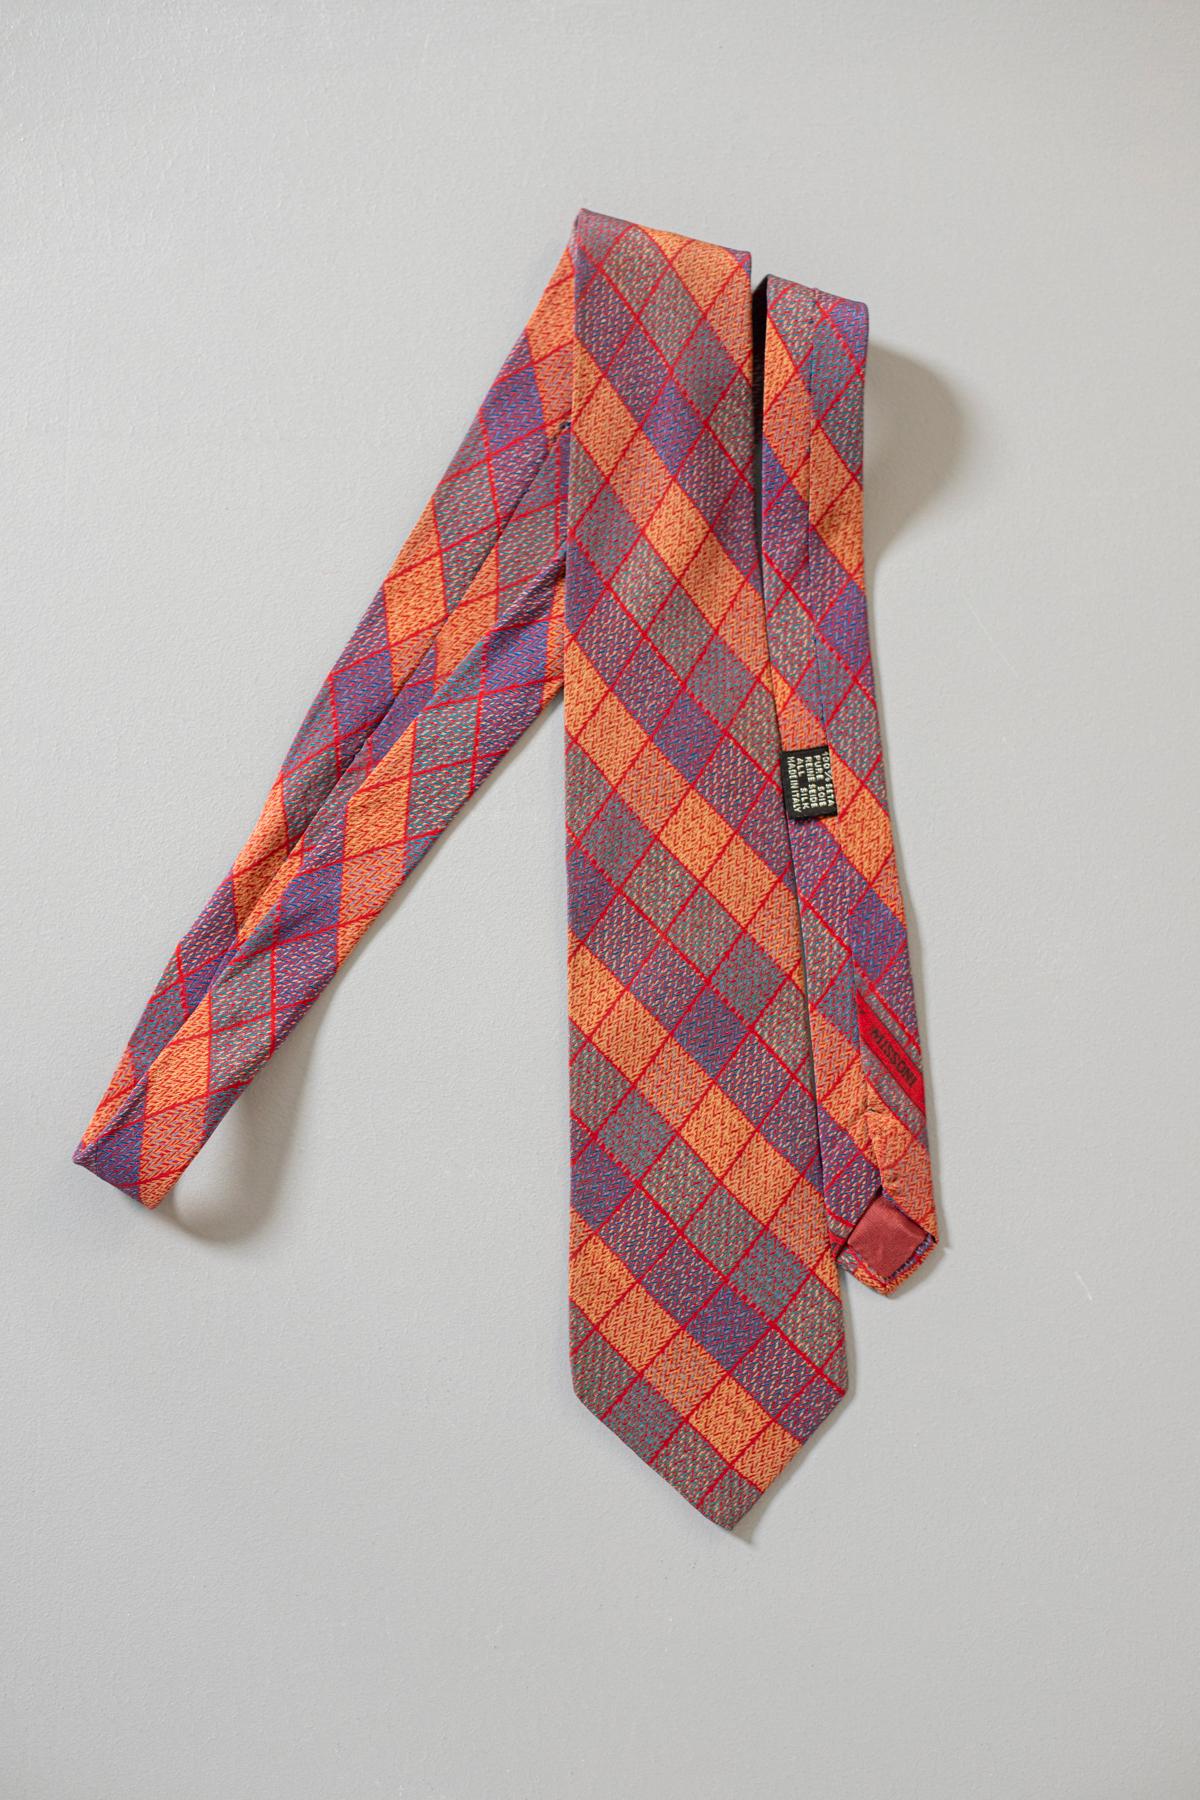 A true evergreen, this tie is timeless. Designed by Missoni, it mirrors the great Italian taste in fashion. This all-silk vintage tie is colourful, yet classical. Decorated with orange, purple, and grey rhombuses, it gives a touch of style on a